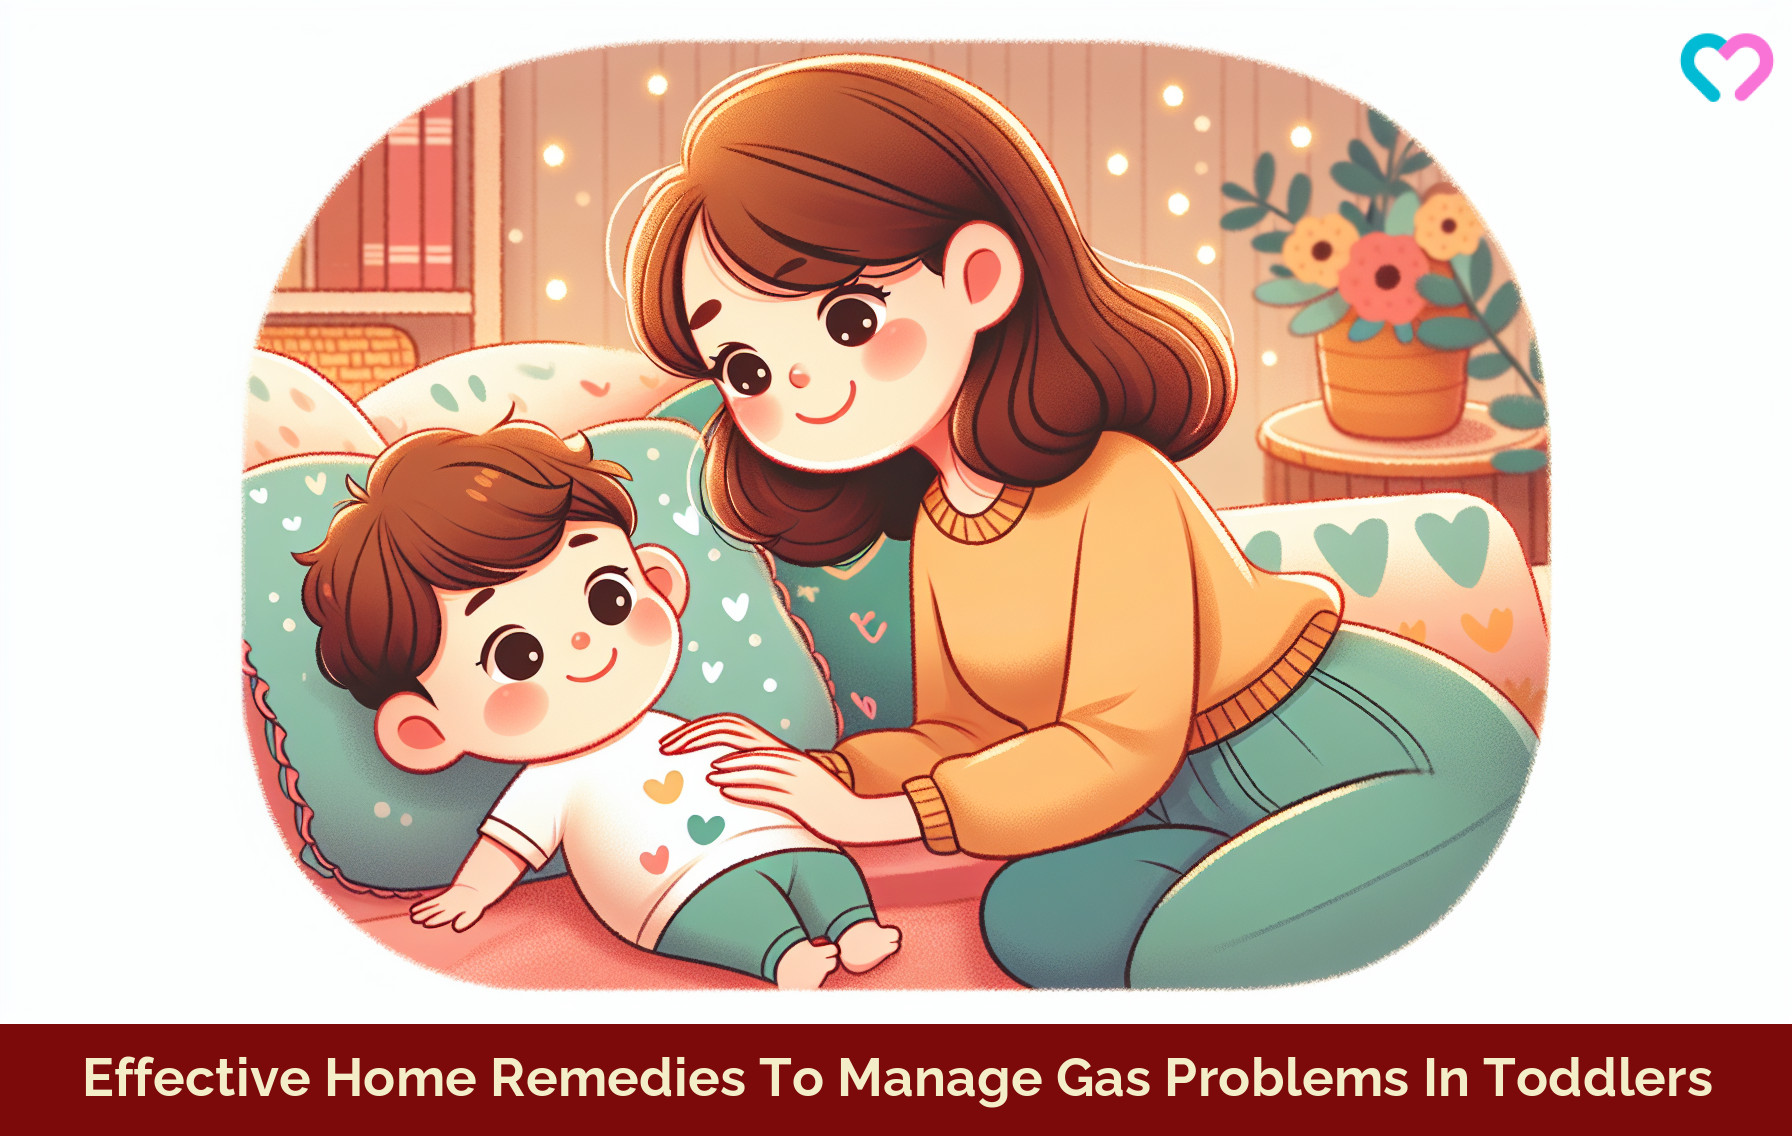 gas pain in toddlers_illustration